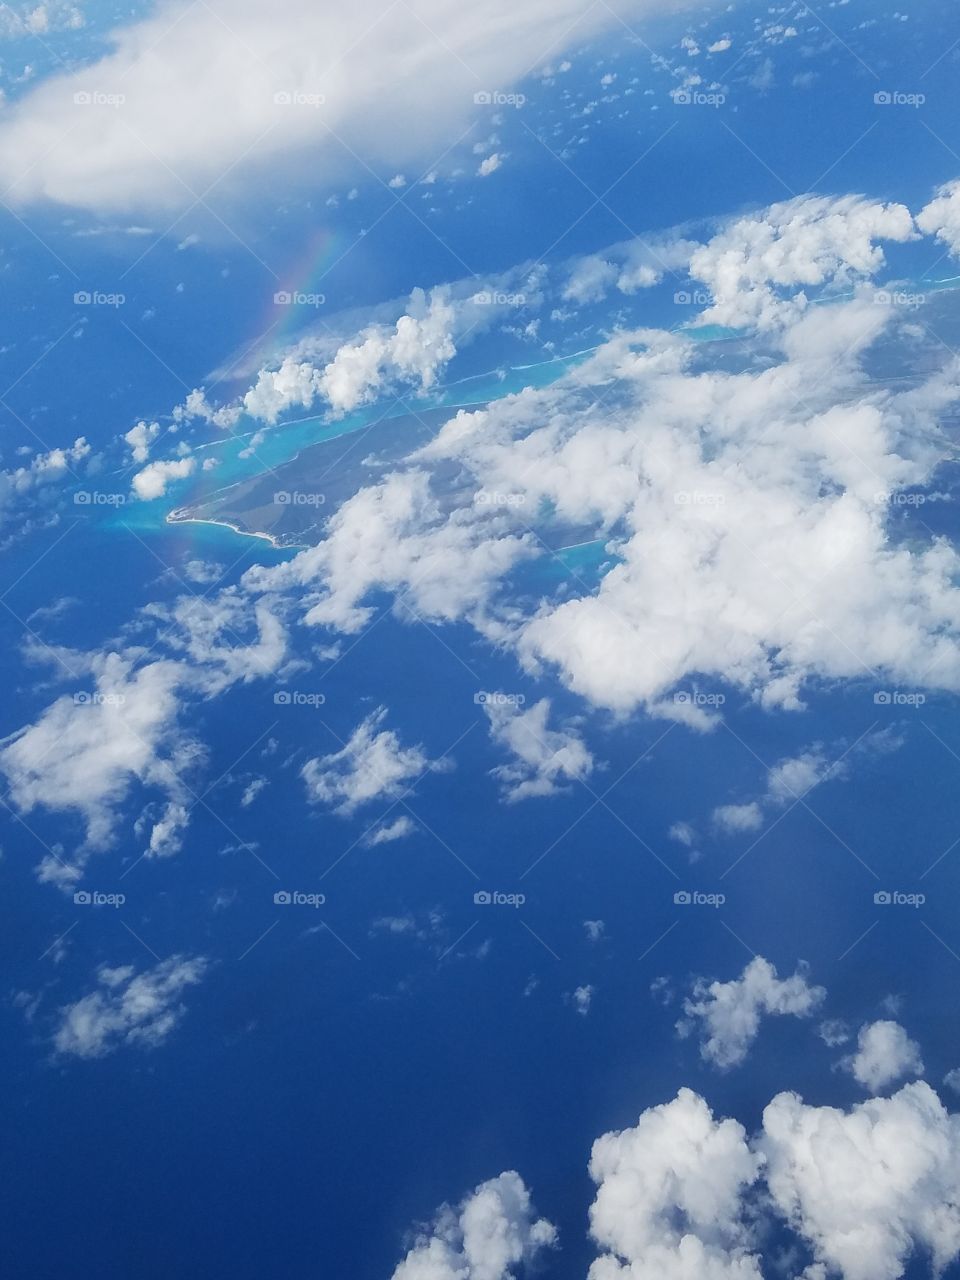 Rainbow in the Clouds